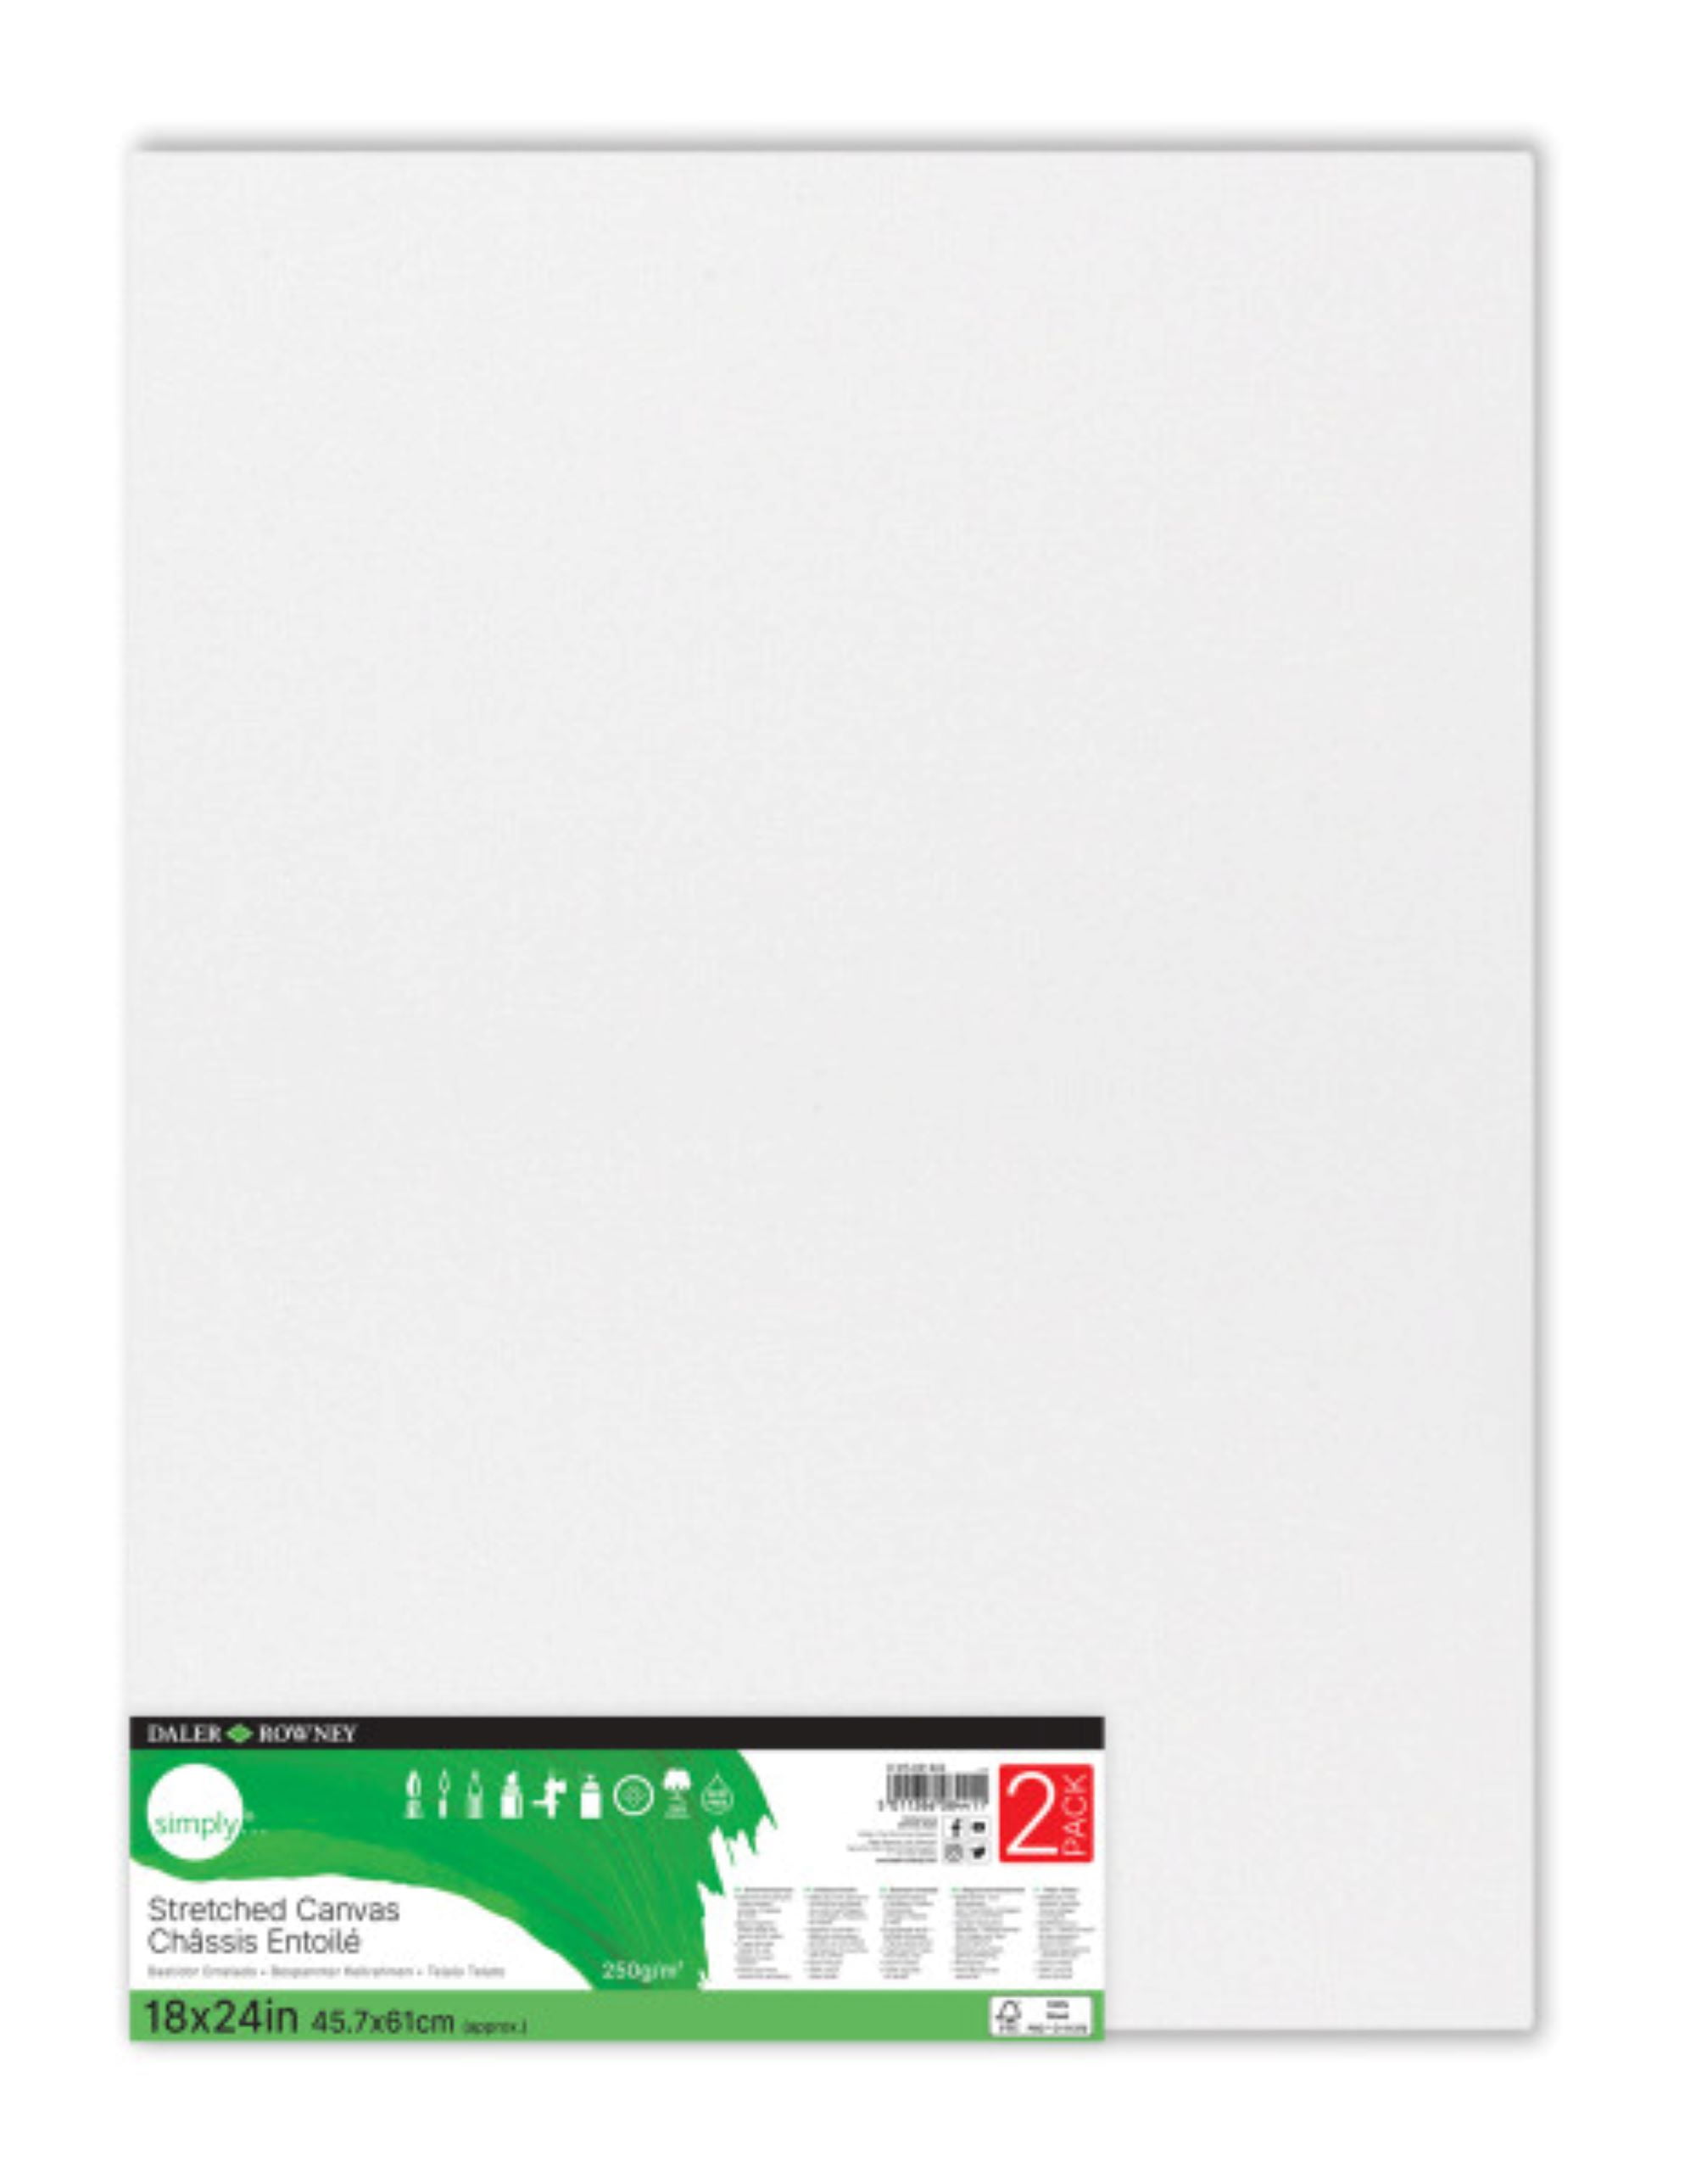 Daler-Rowney Simply Stretched Canvas, White Art Canvas, 11